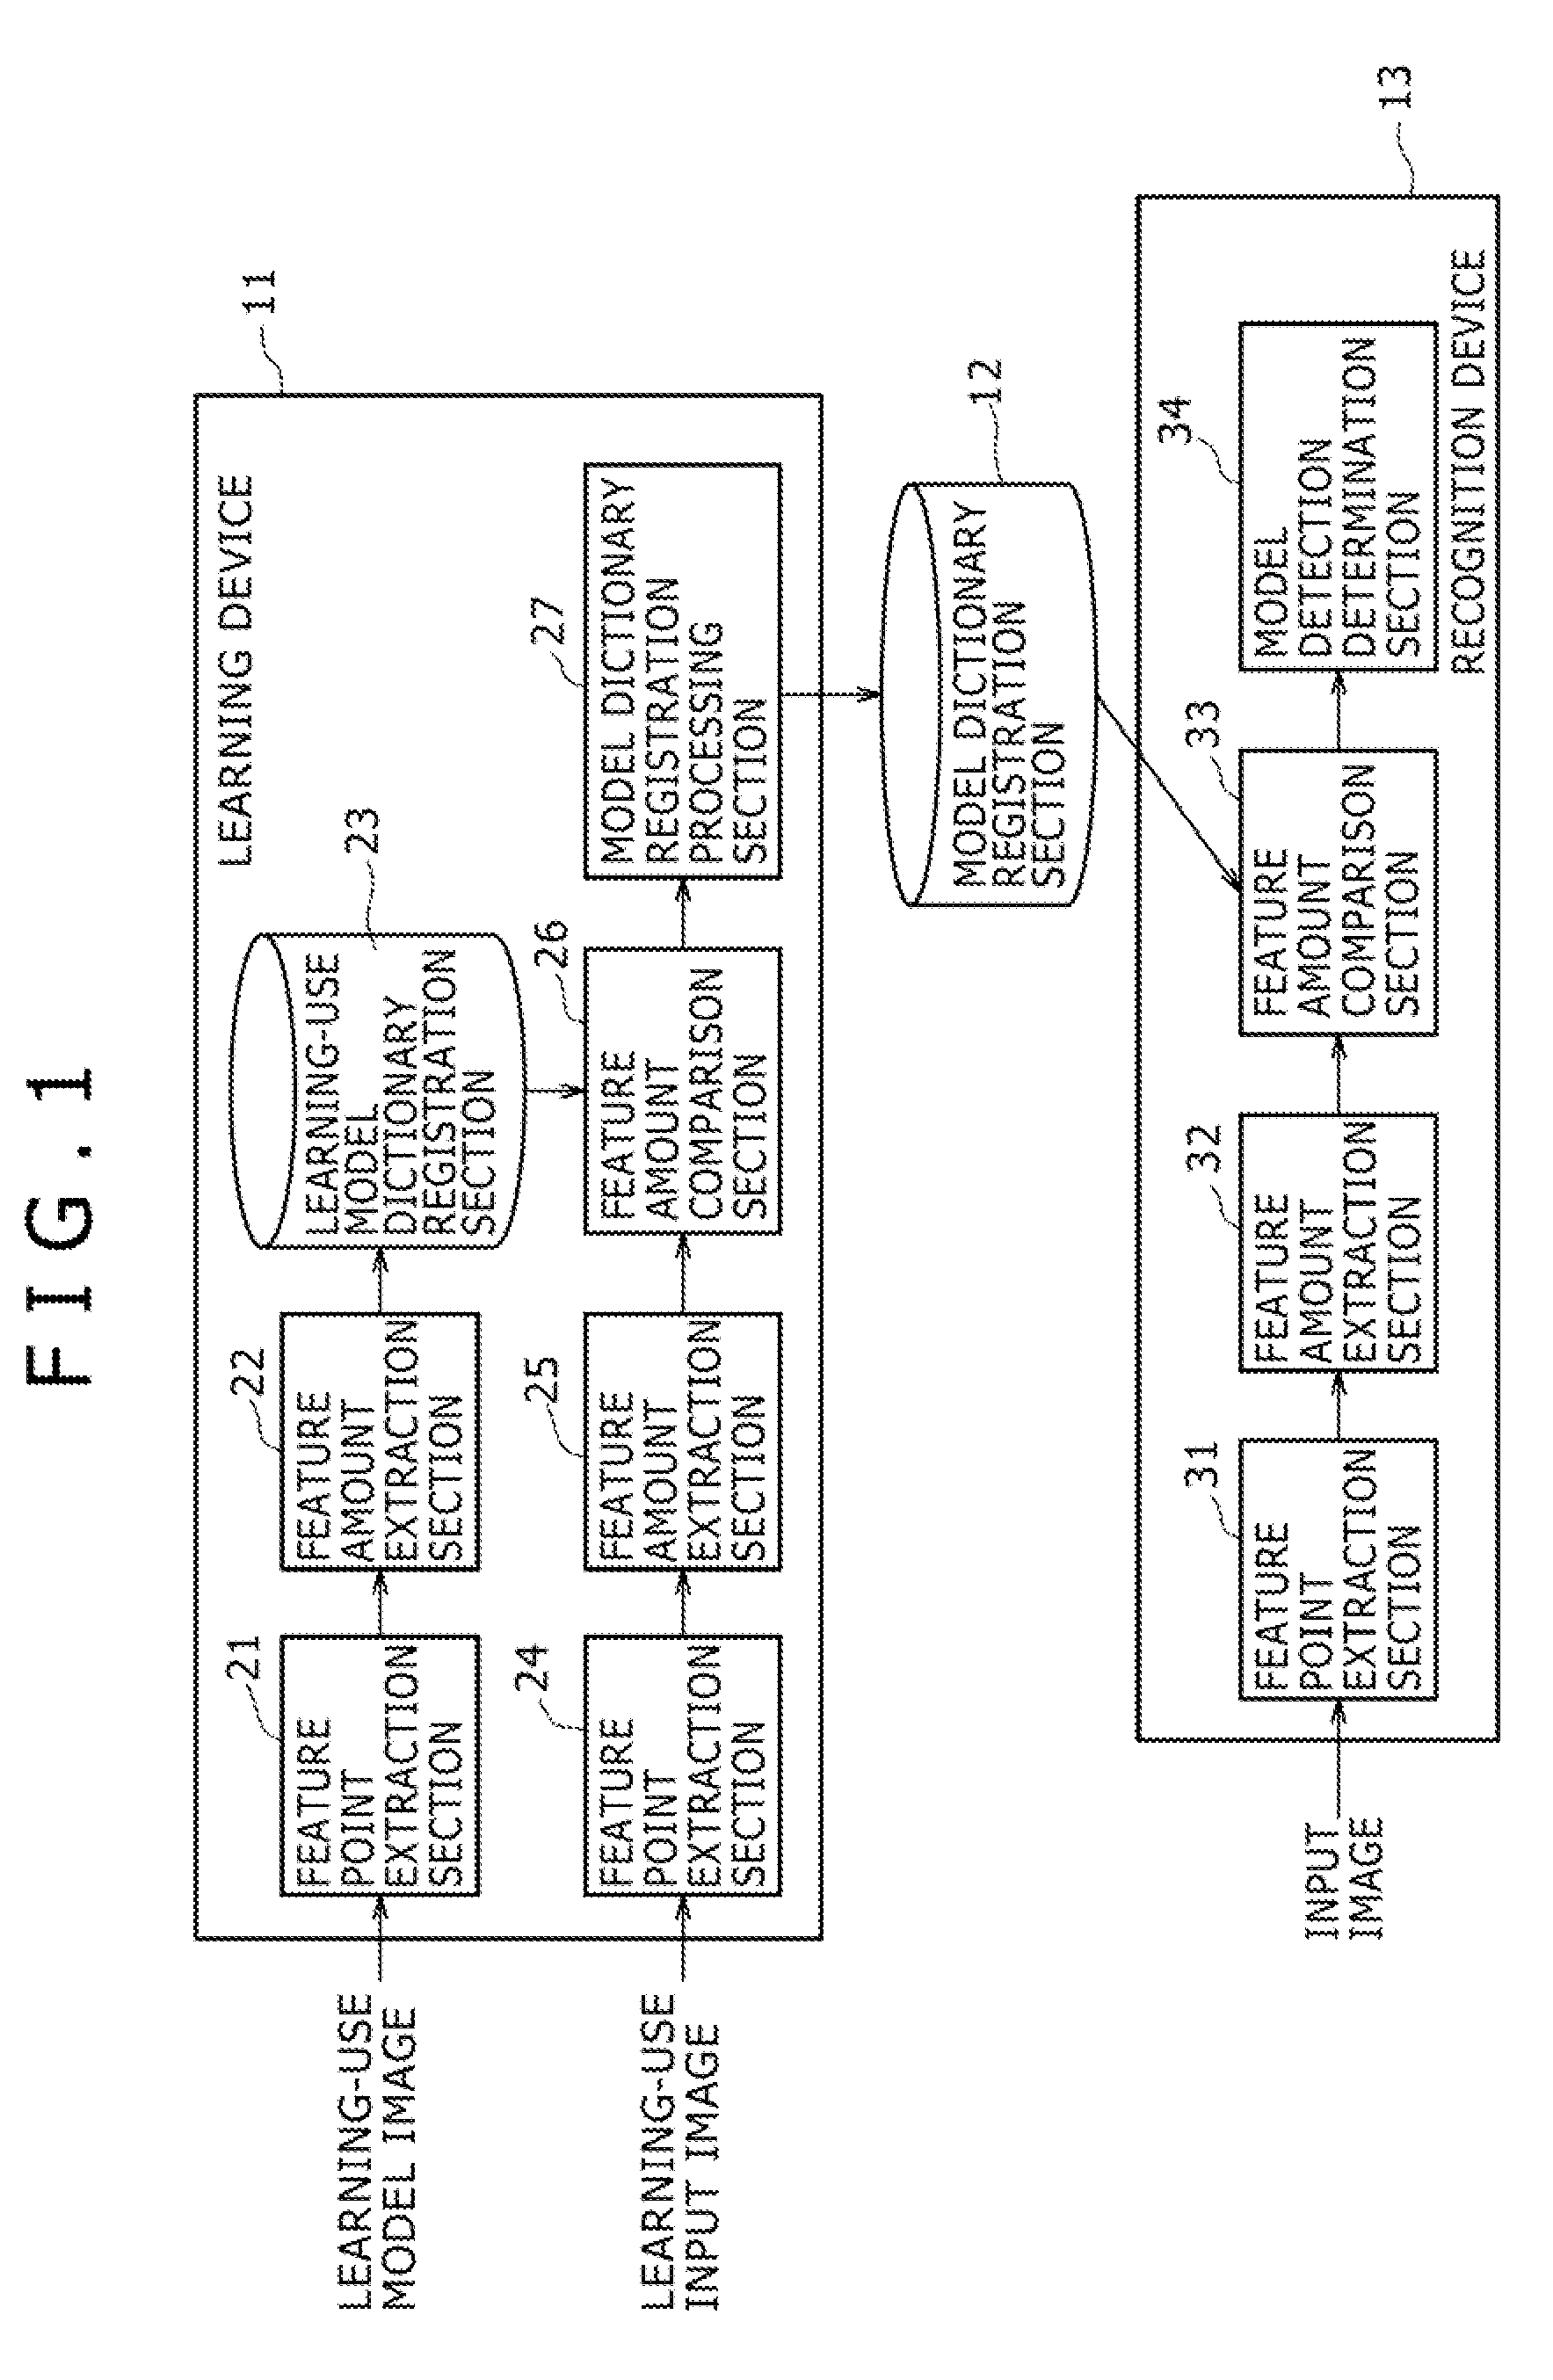 Image Processing System, Learning Device and Method, and Program